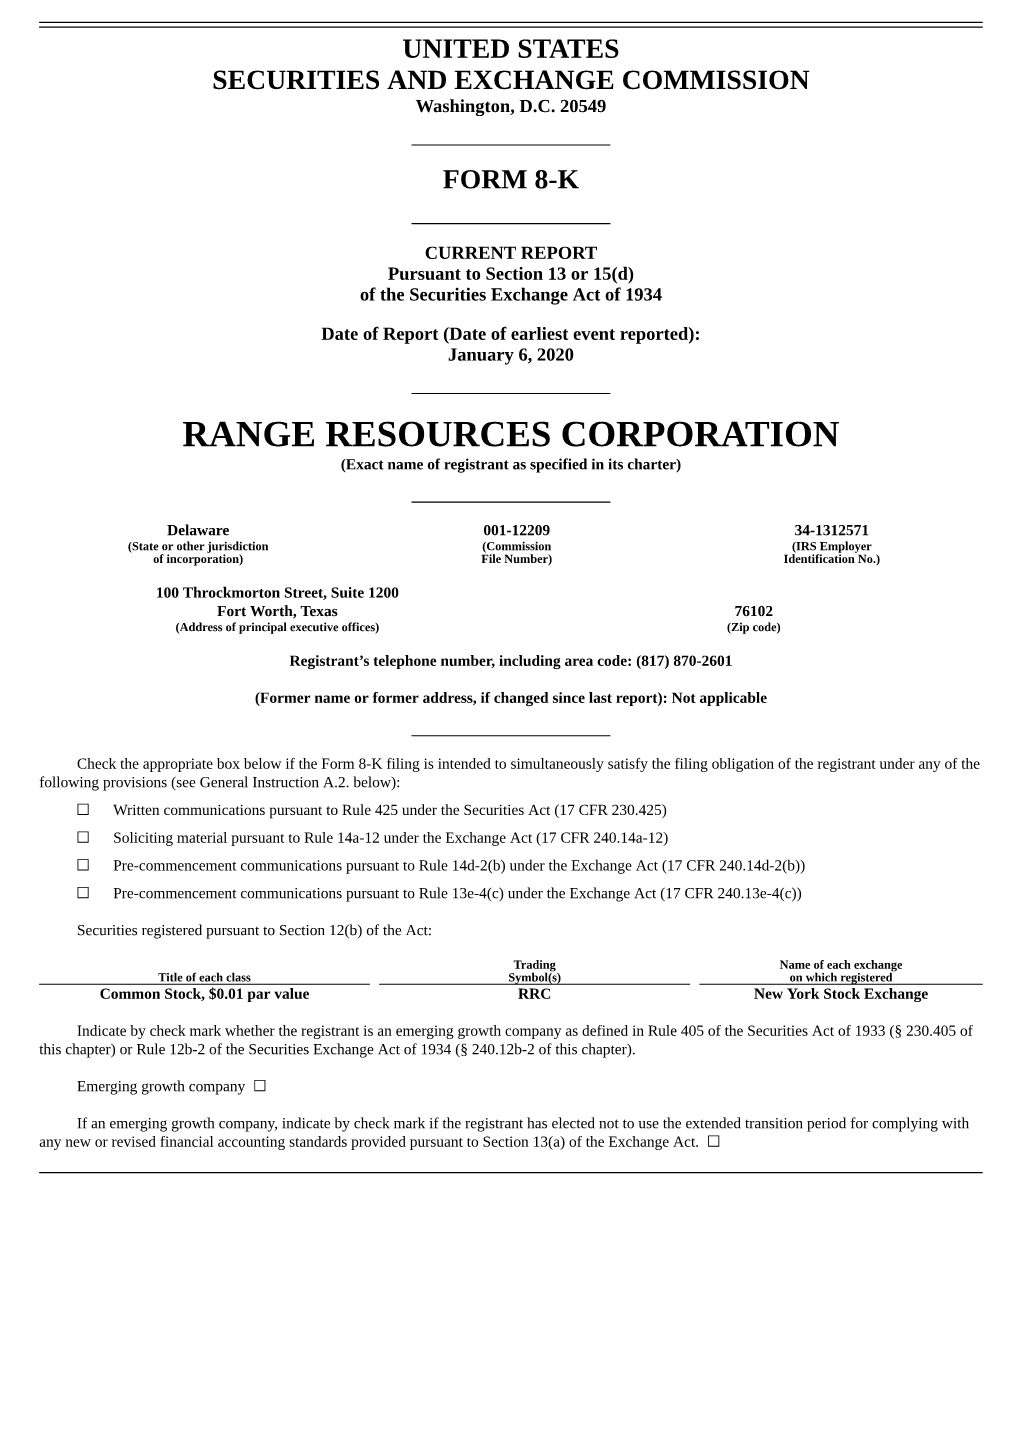 RANGE RESOURCES CORPORATION (Exact Name of Registrant As Specified in Its Charter)